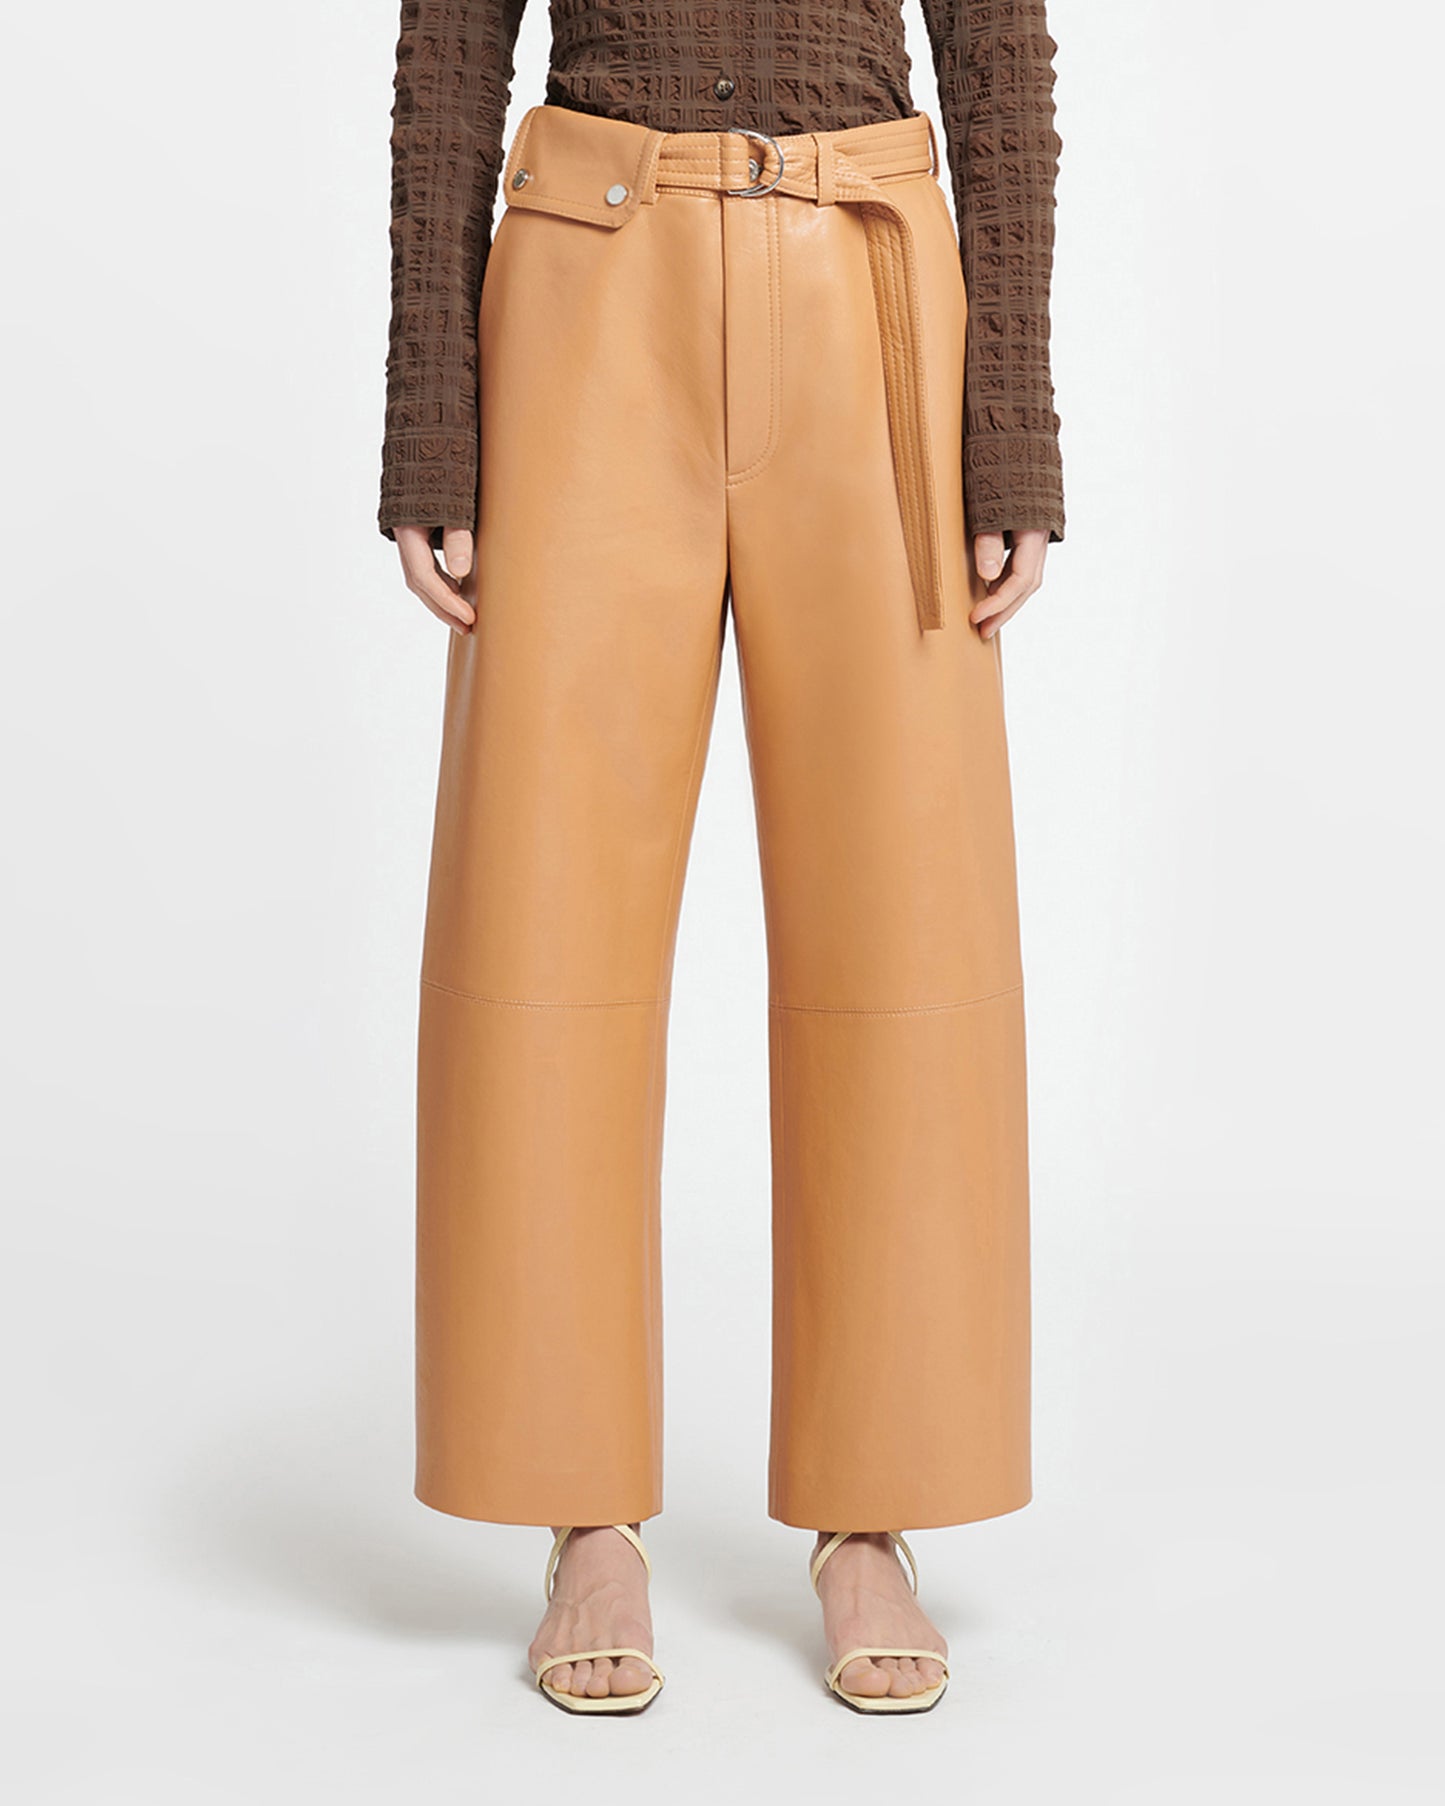 Sanna - Belted Regenerated Leather Pants - Tan Apricot